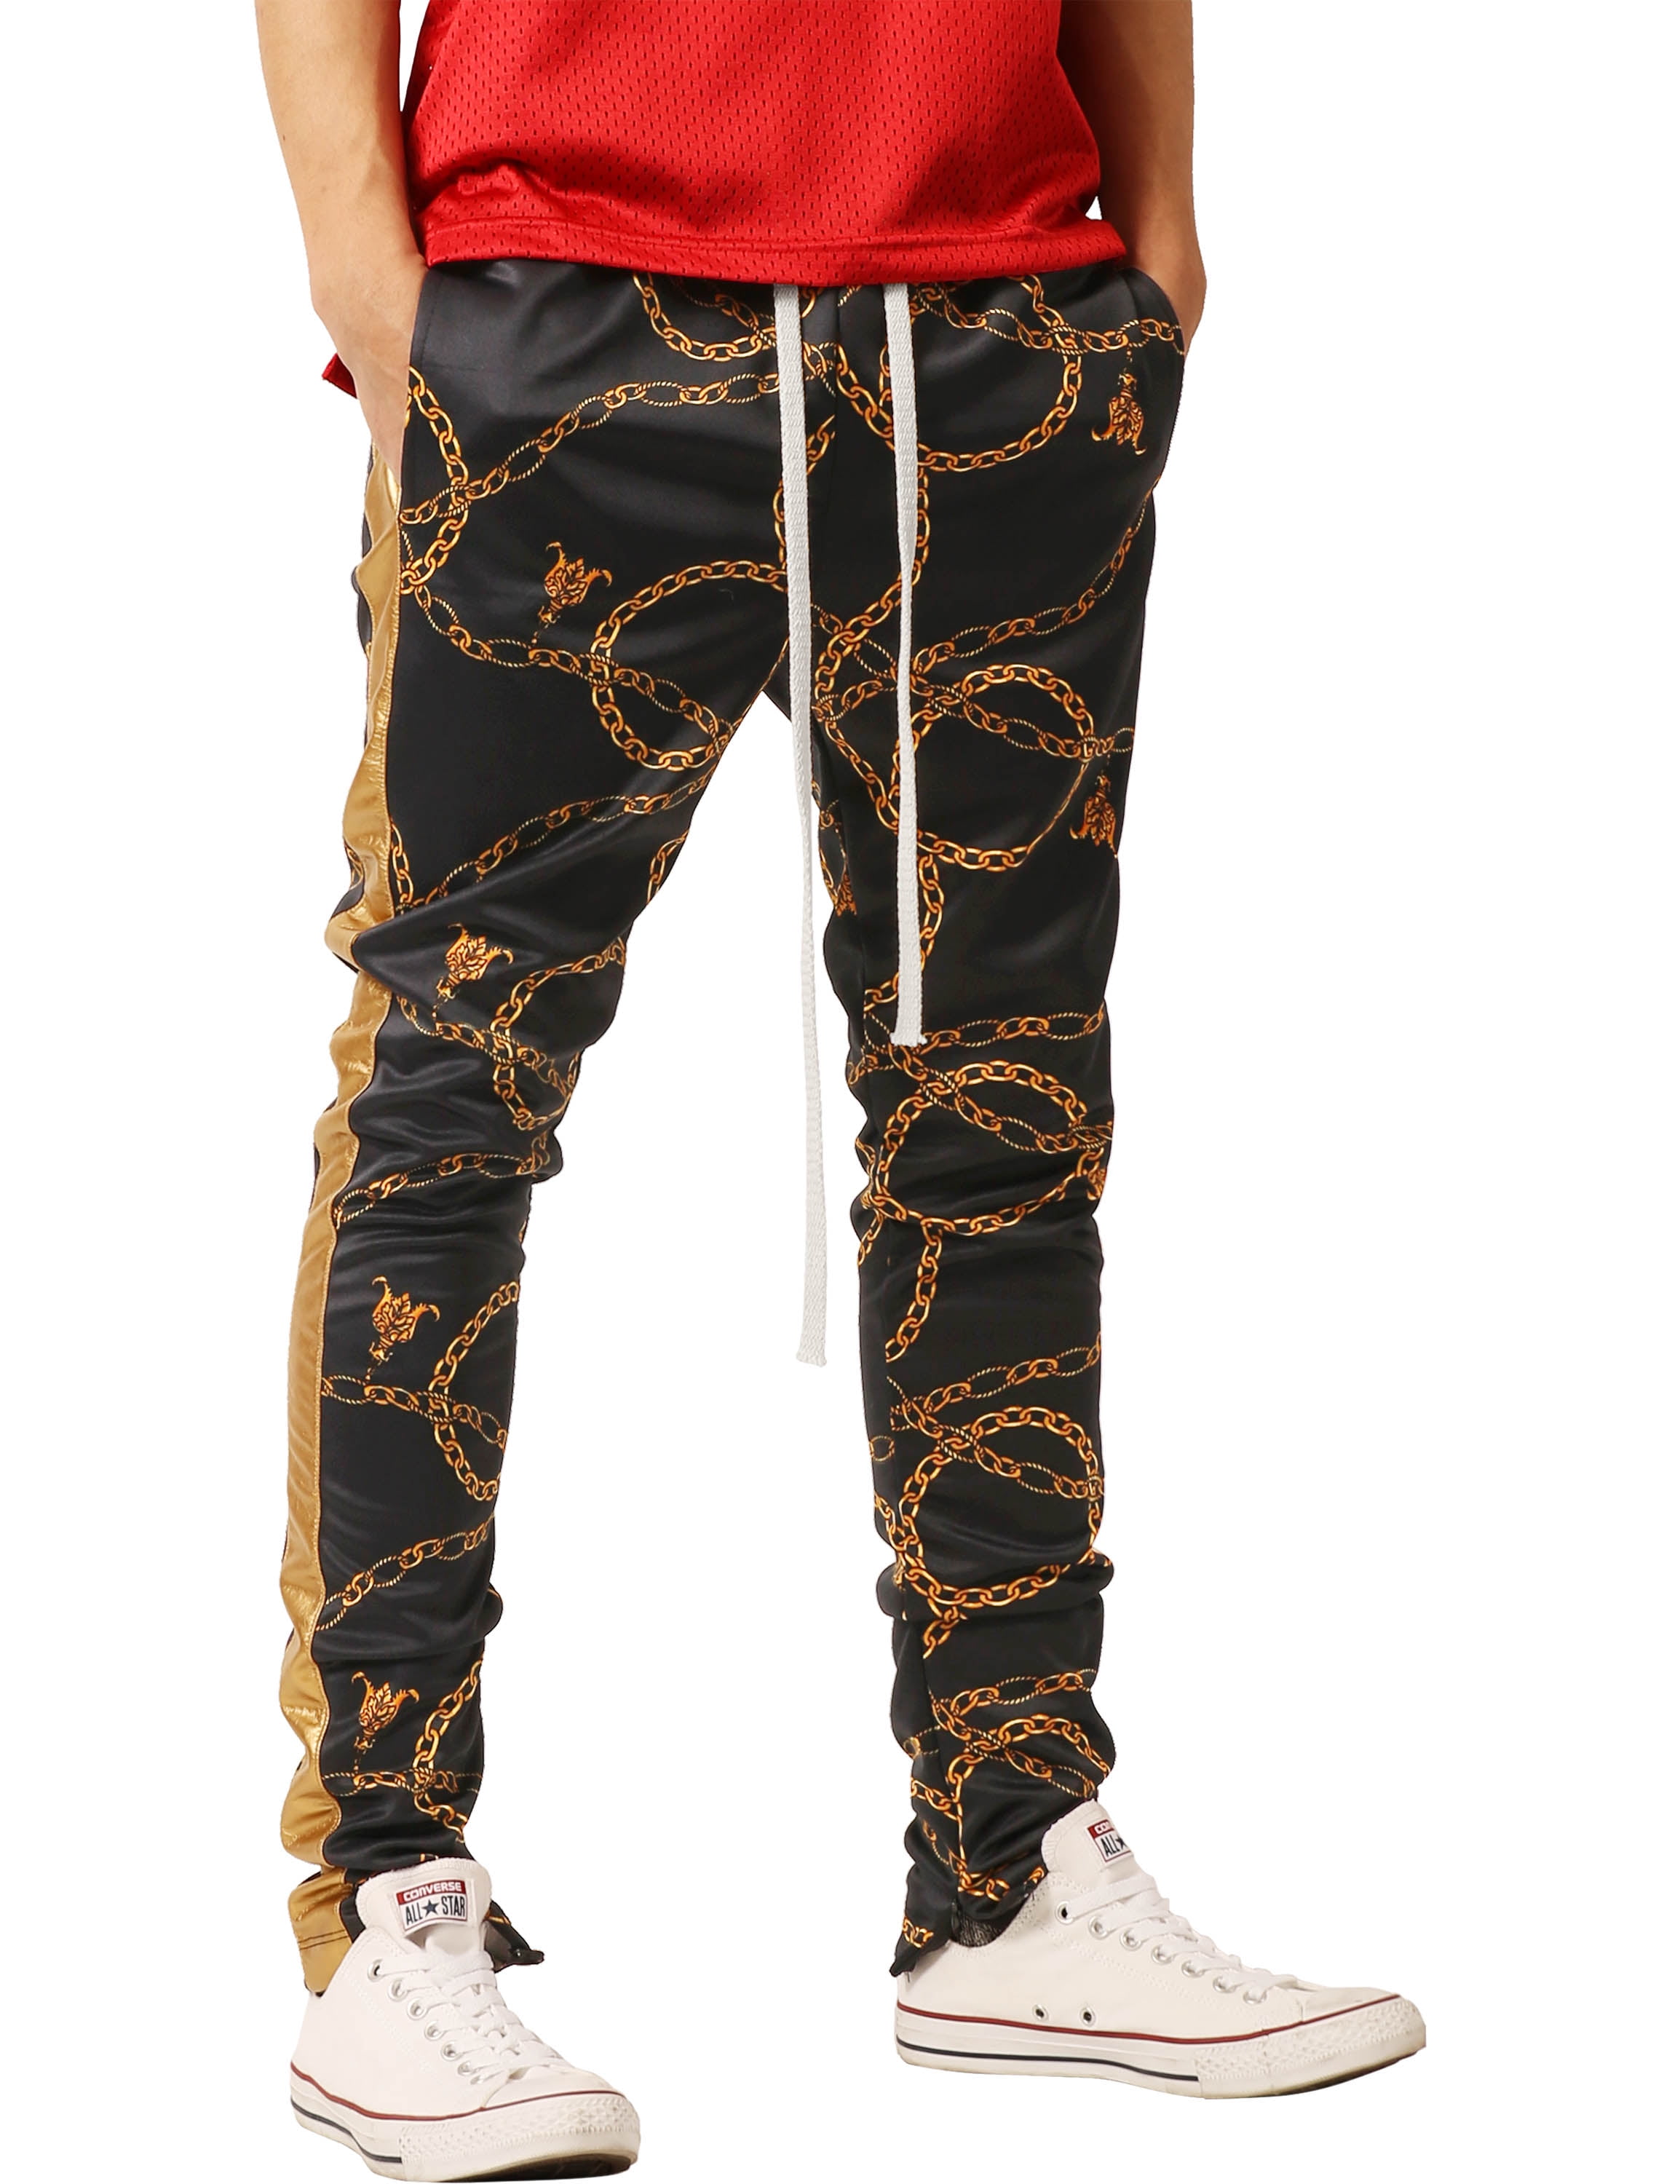 Mens Combo of 2 Tracking Wear Track Pants with Chain Pocket